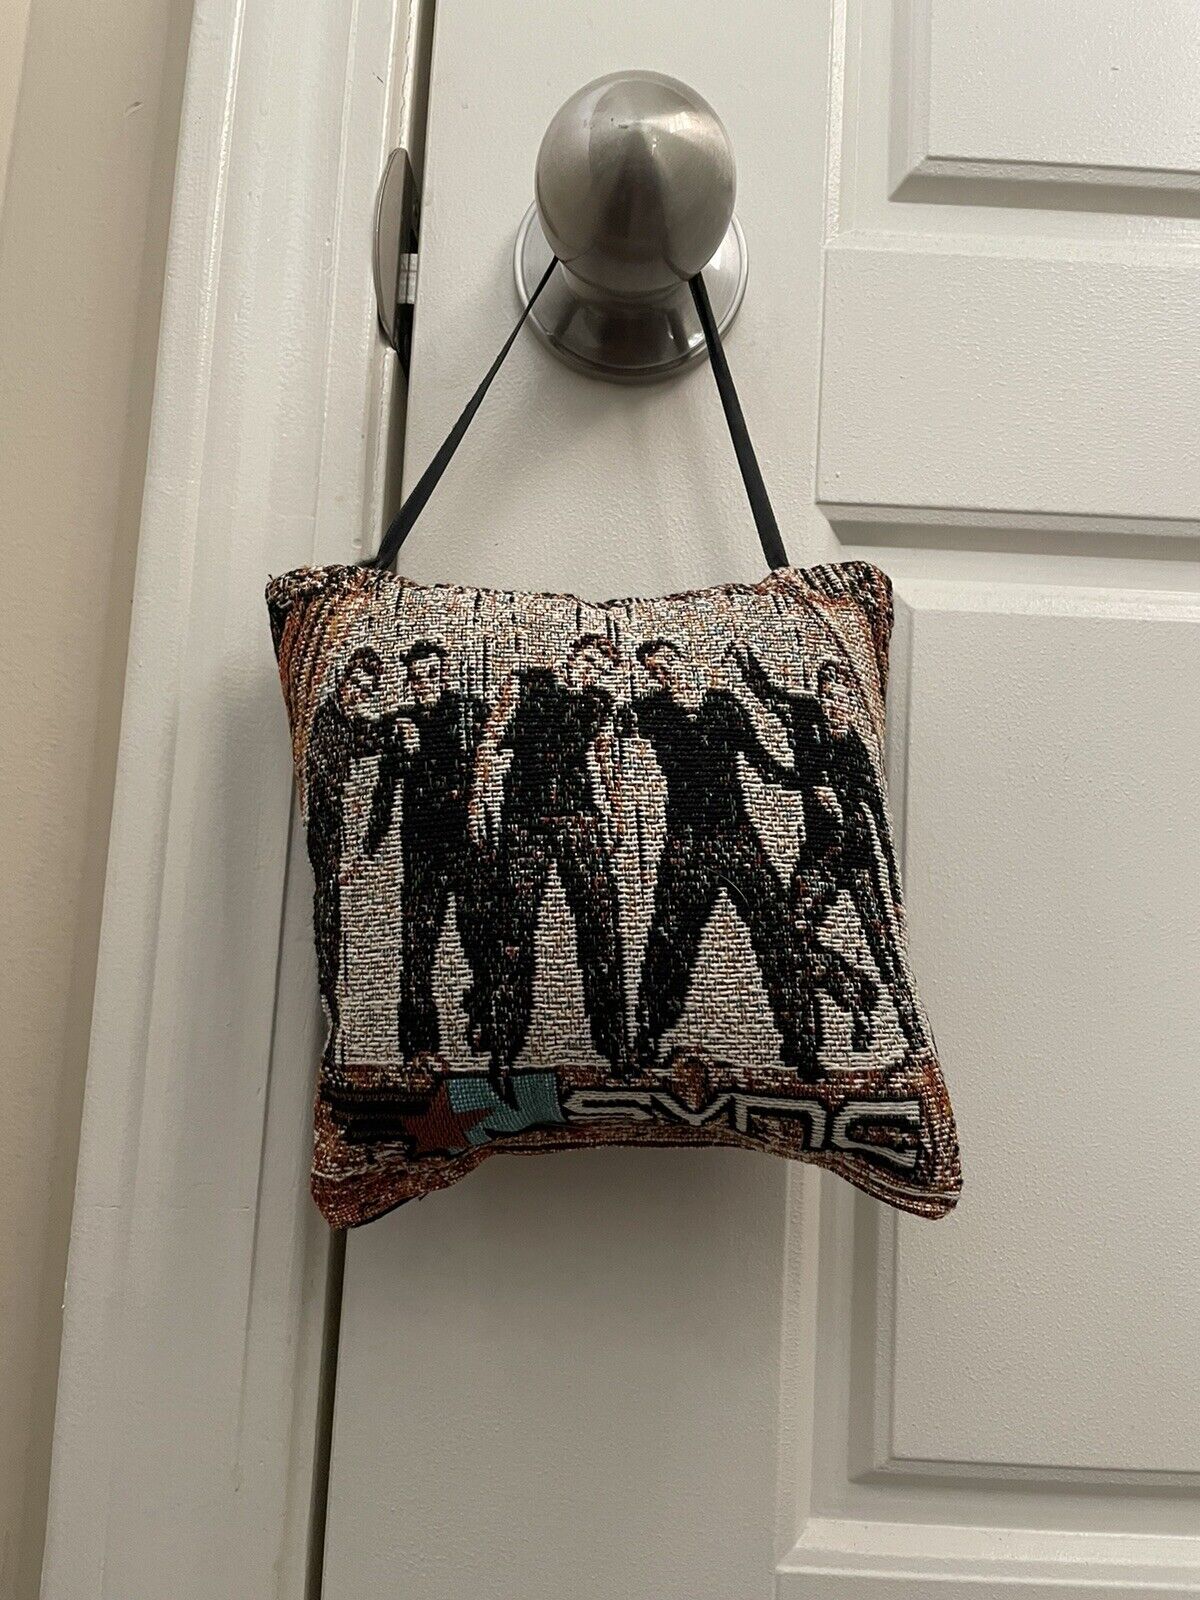 Nsync Vintage Small Pillow Decoration Hangable No Strings Attached